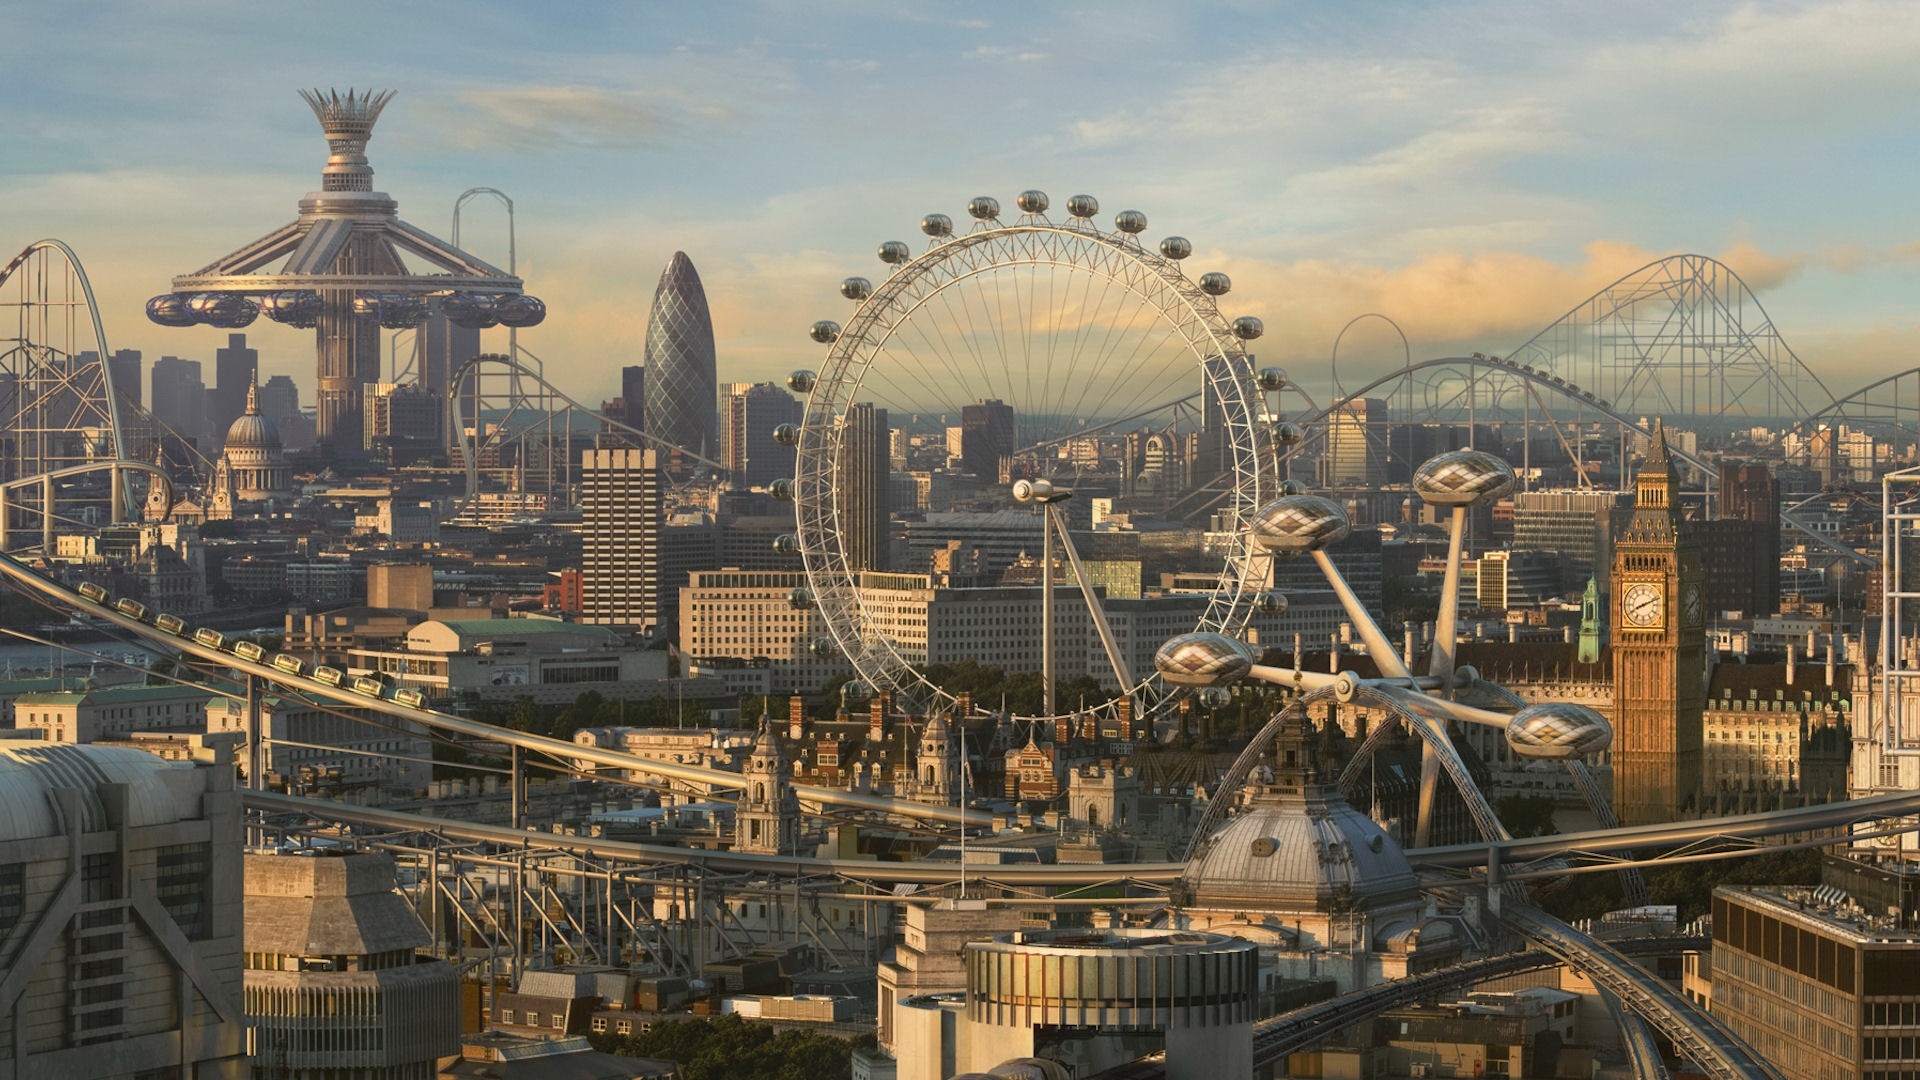 Be Totally Wrong But Cities Of The Future According To